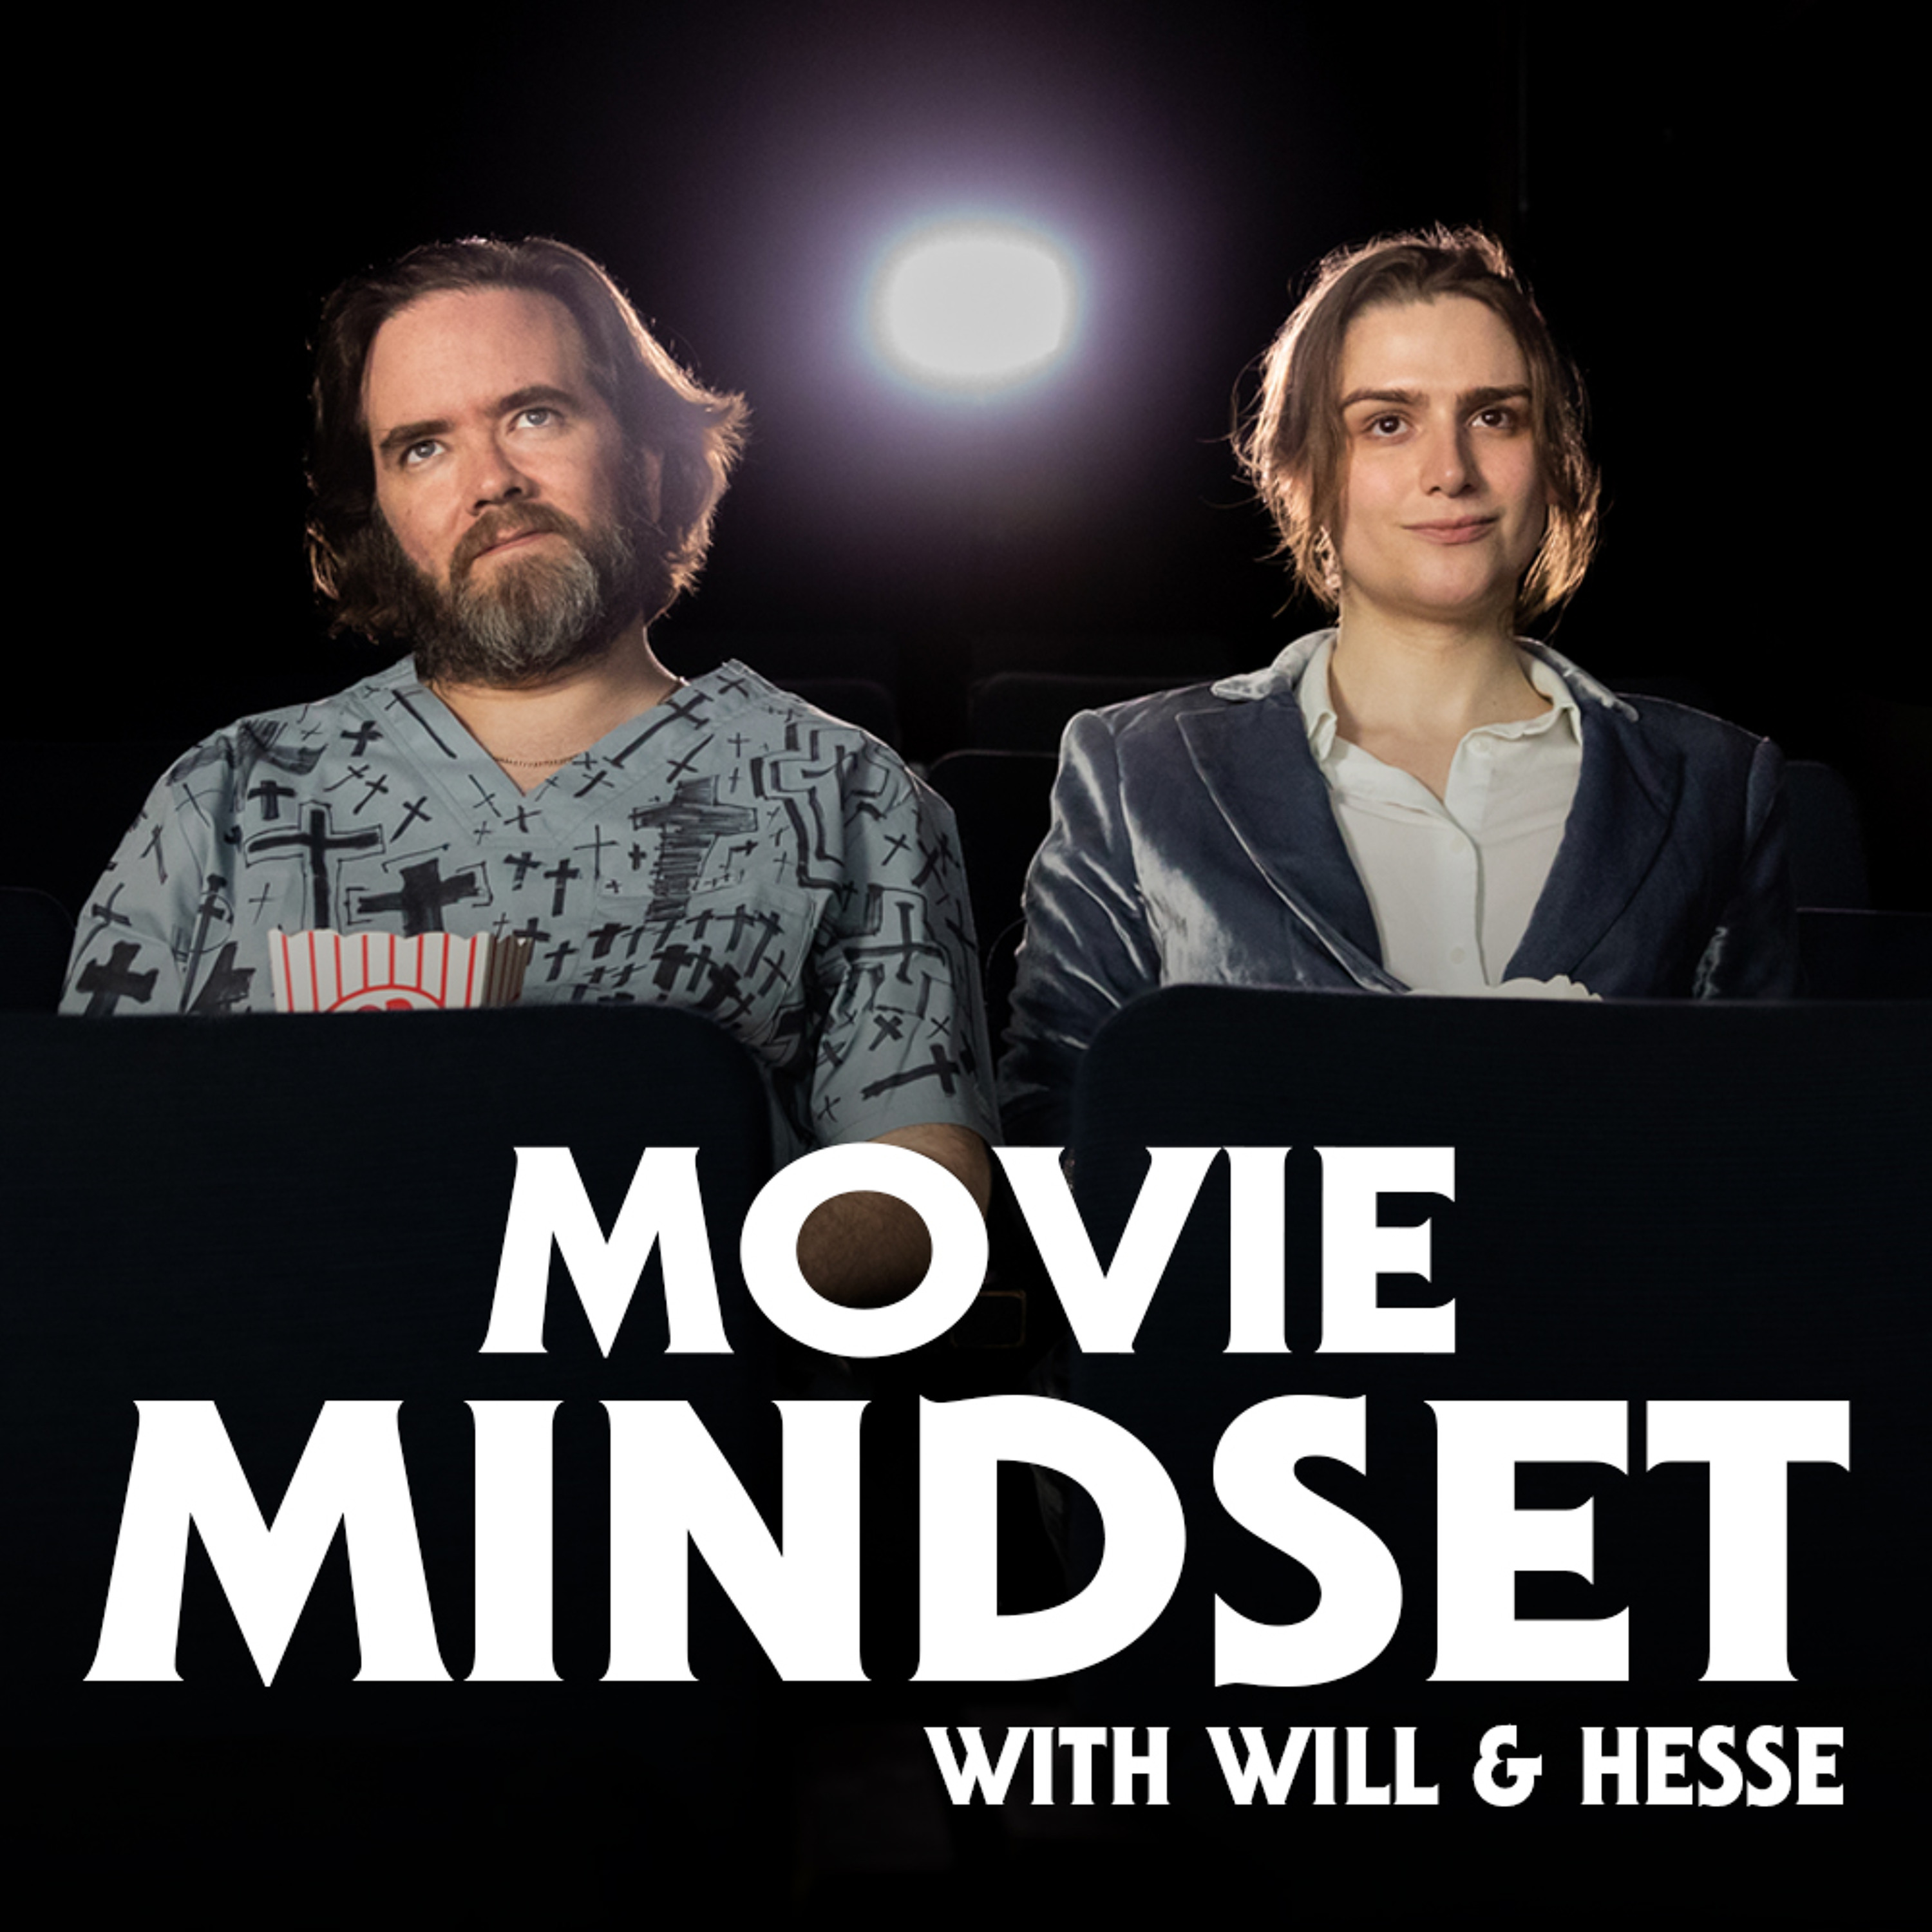 Movie Mindset 08 Teaser - The Sweet Smell of Success